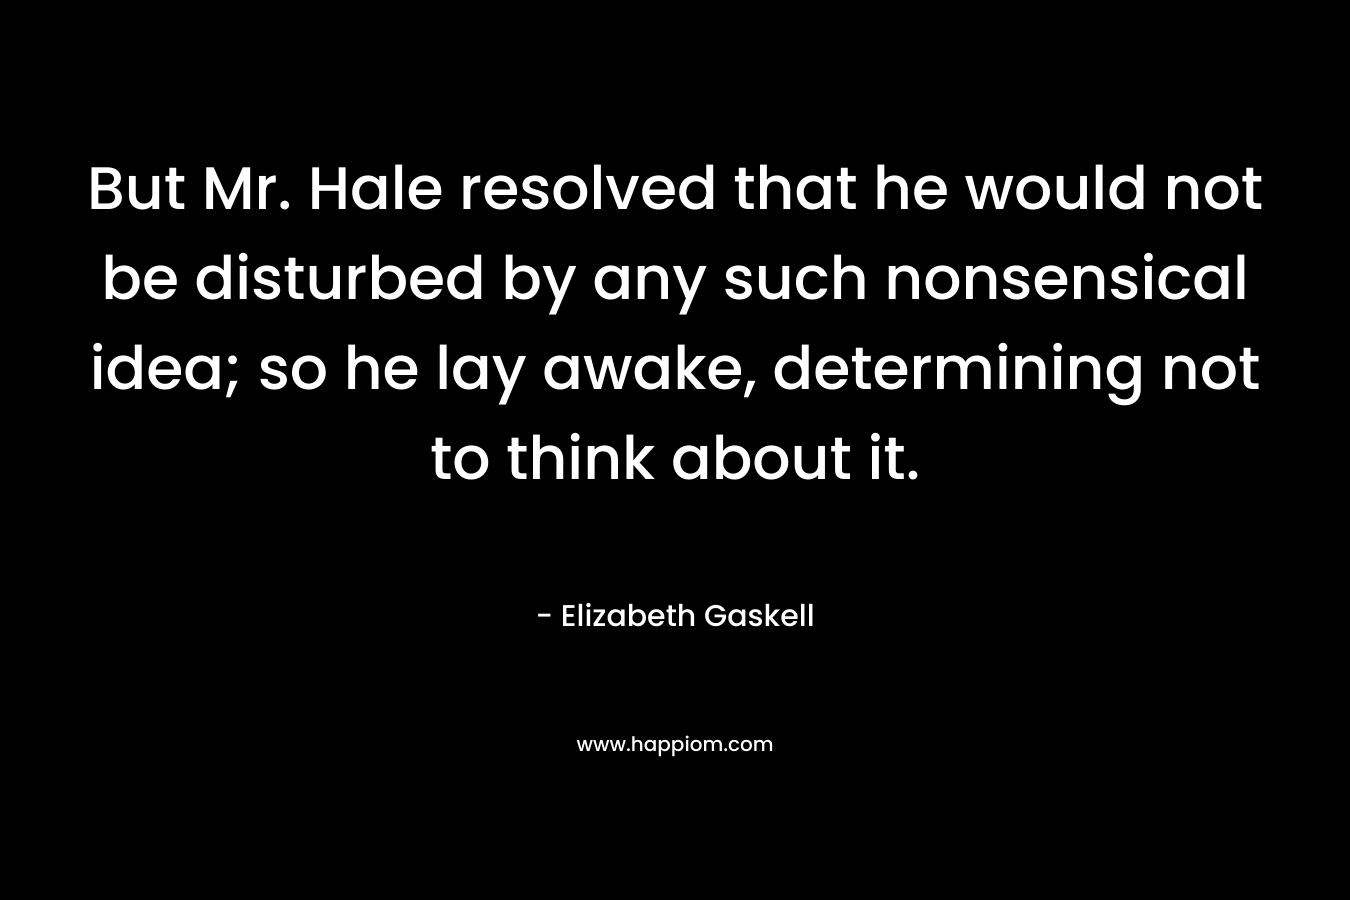 But Mr. Hale resolved that he would not be disturbed by any such nonsensical idea; so he lay awake, determining not to think about it.